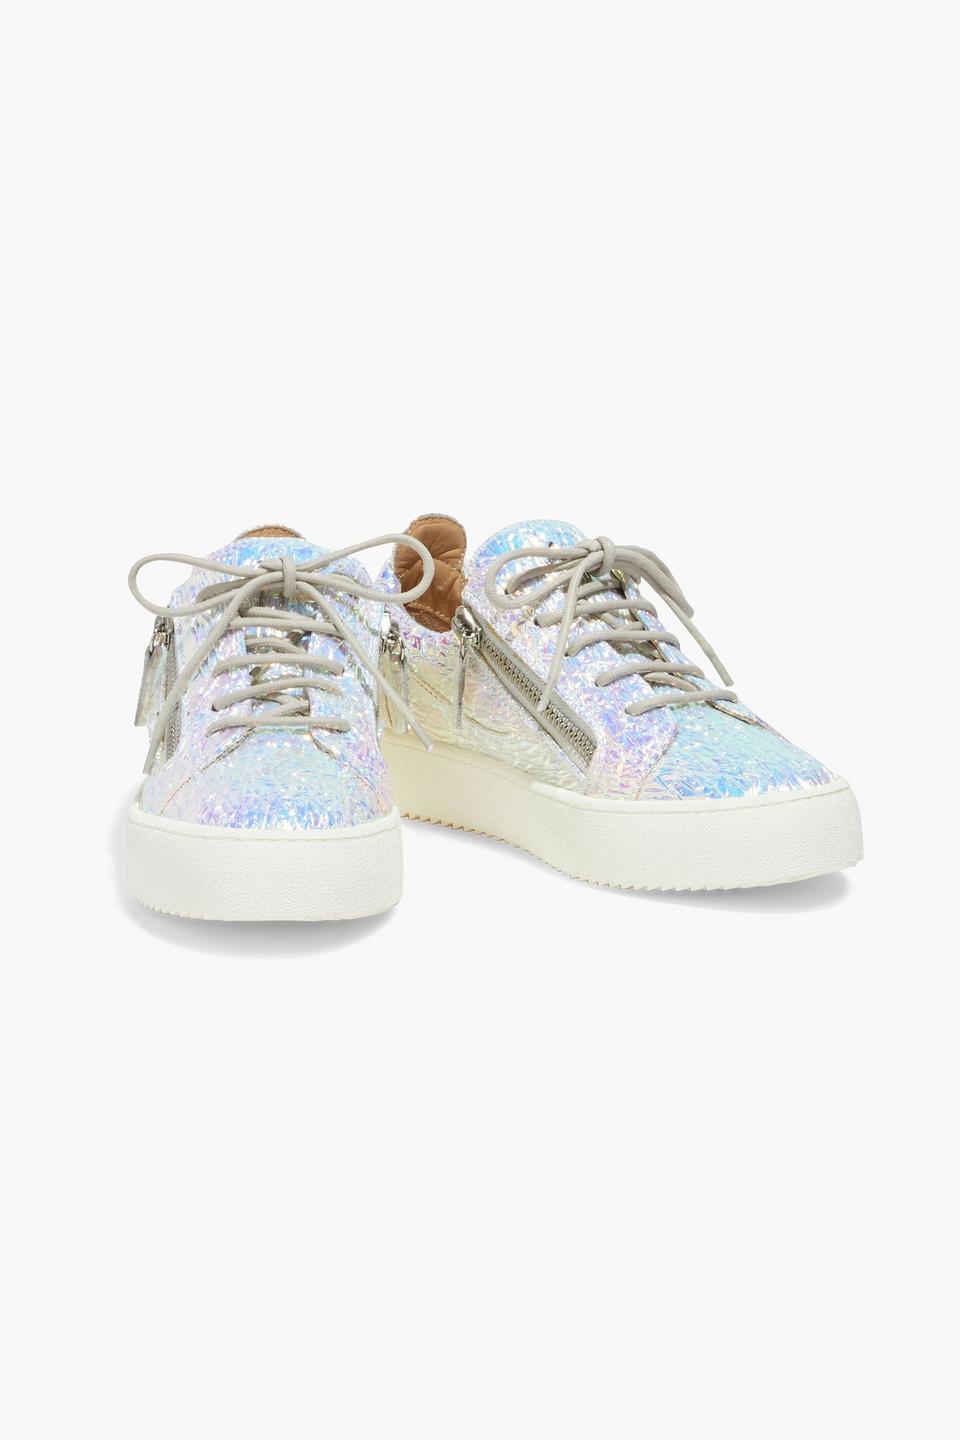 Giuseppe Zanotti Frankie Iridescent Crinkled Faux Leather Sneakers | Lyst